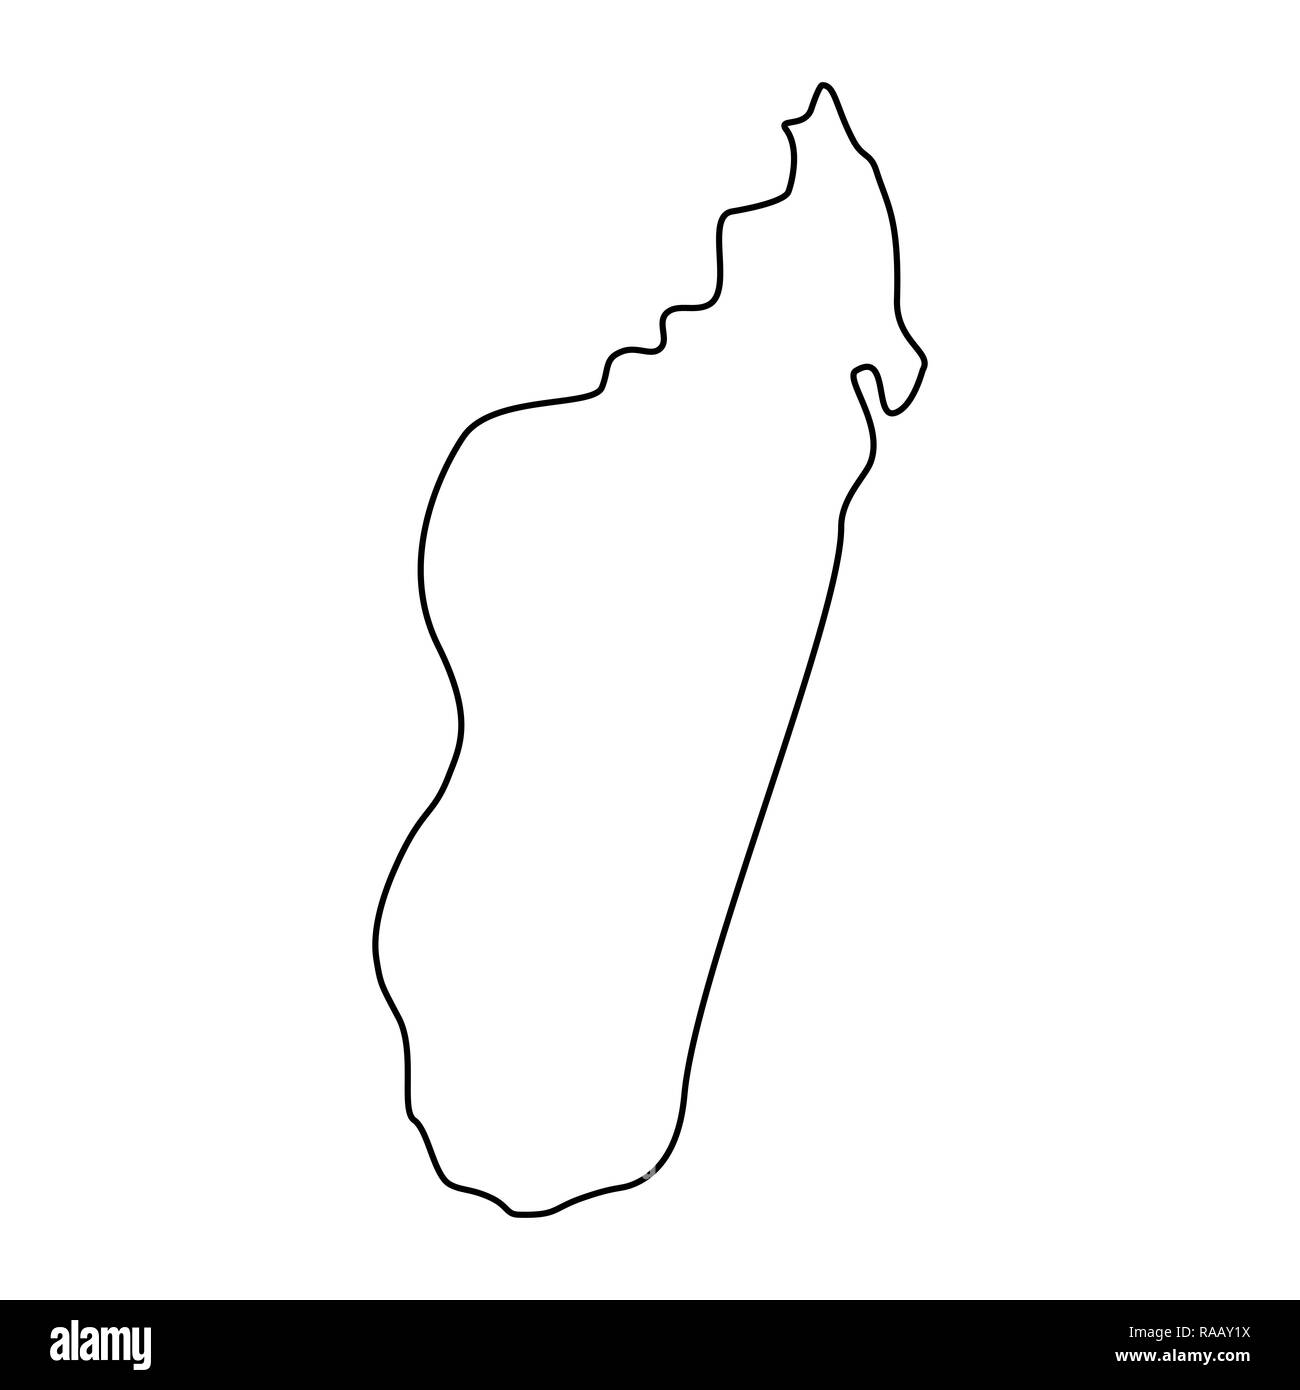 map of Madagascar - outline. Silhouette of map of Madagascar  illustration Stock Photo